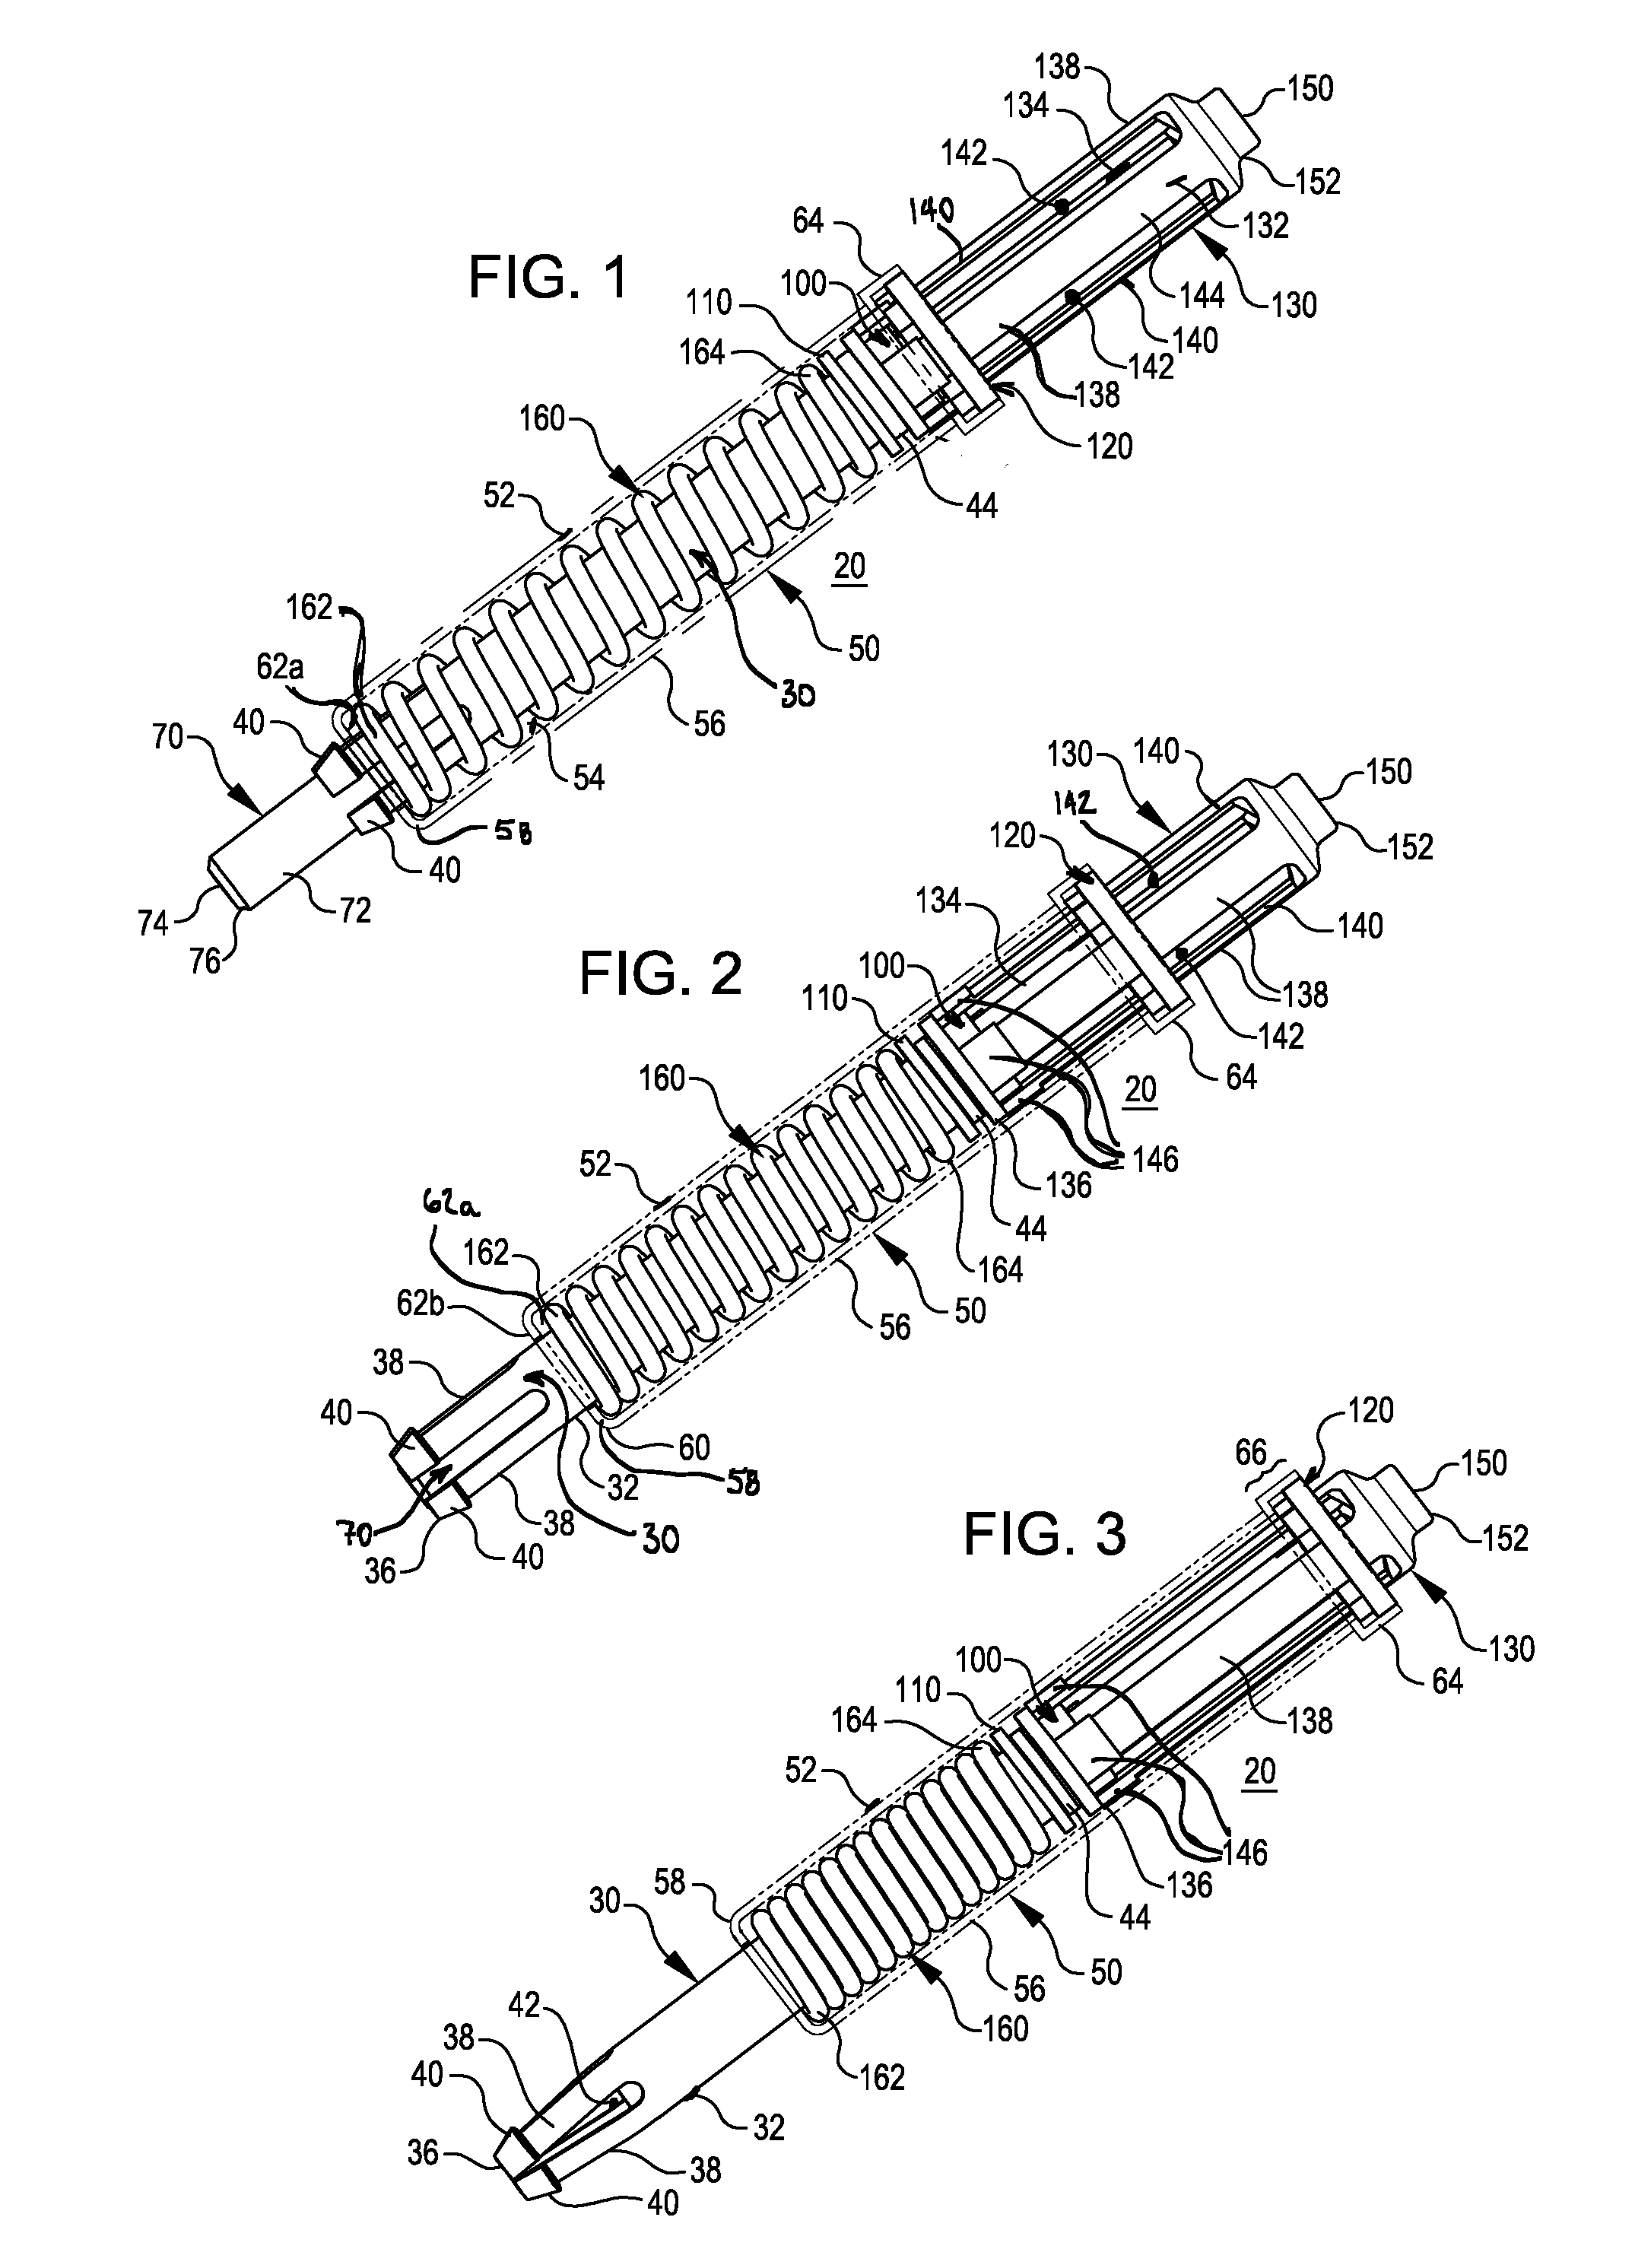 Biased blind side temporary fasteners, systems and methods